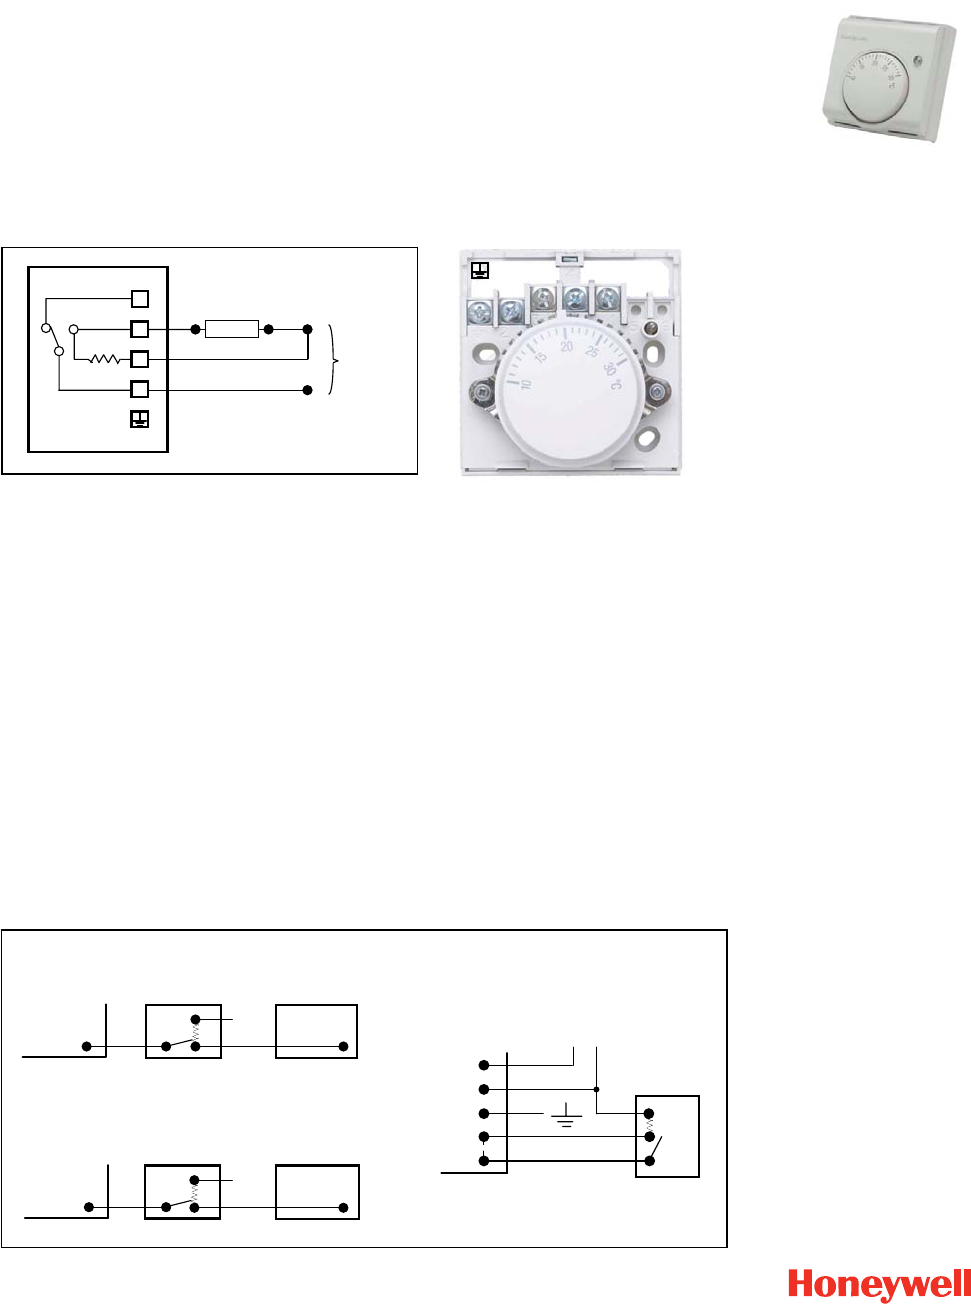 Manual Honeywell T6360 (page 1 of 1) (English)  Wiring Diagram For Honeywell T6360b Room Thermostat    Libble.eu